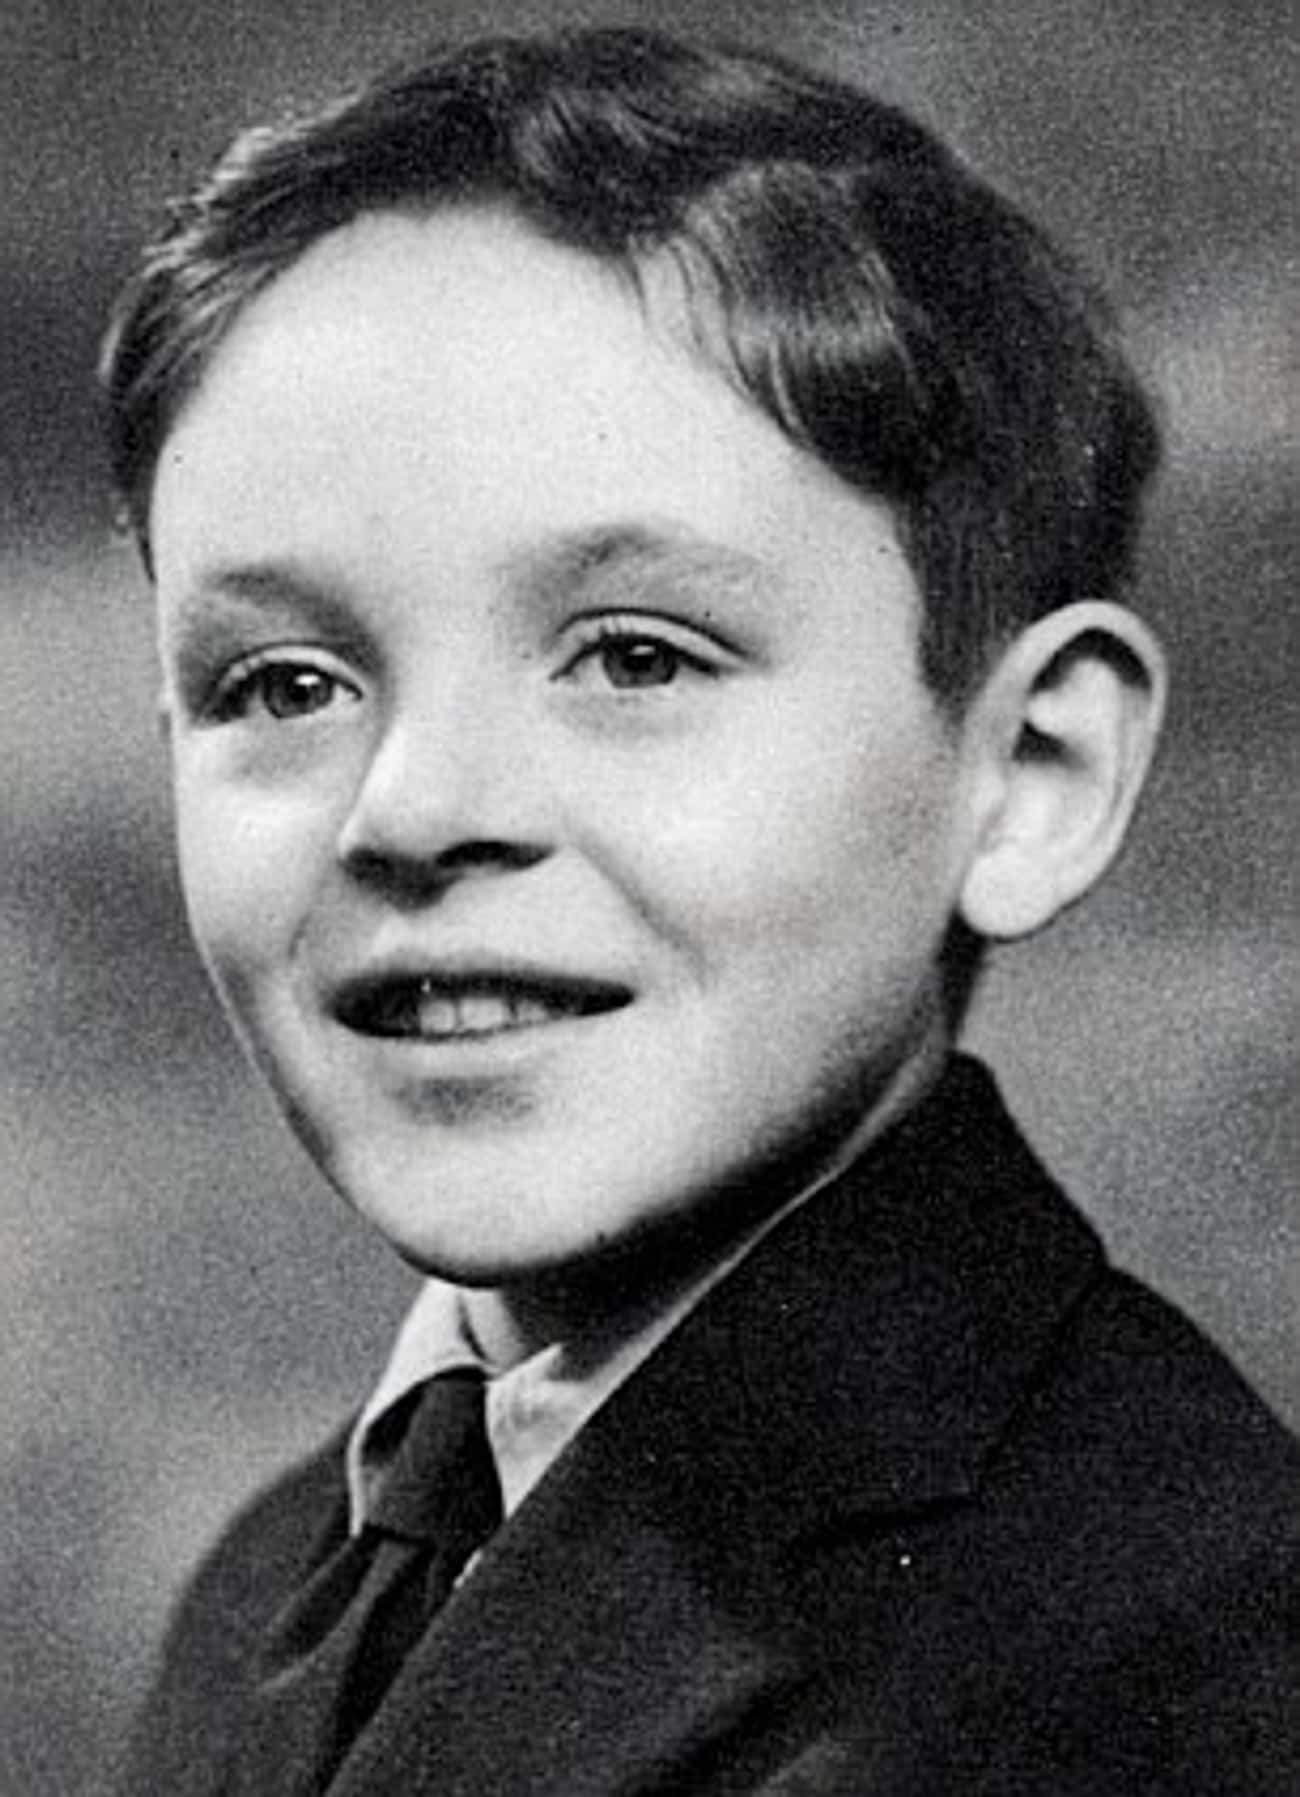 17 Pictures of Young Anthony Hopkins